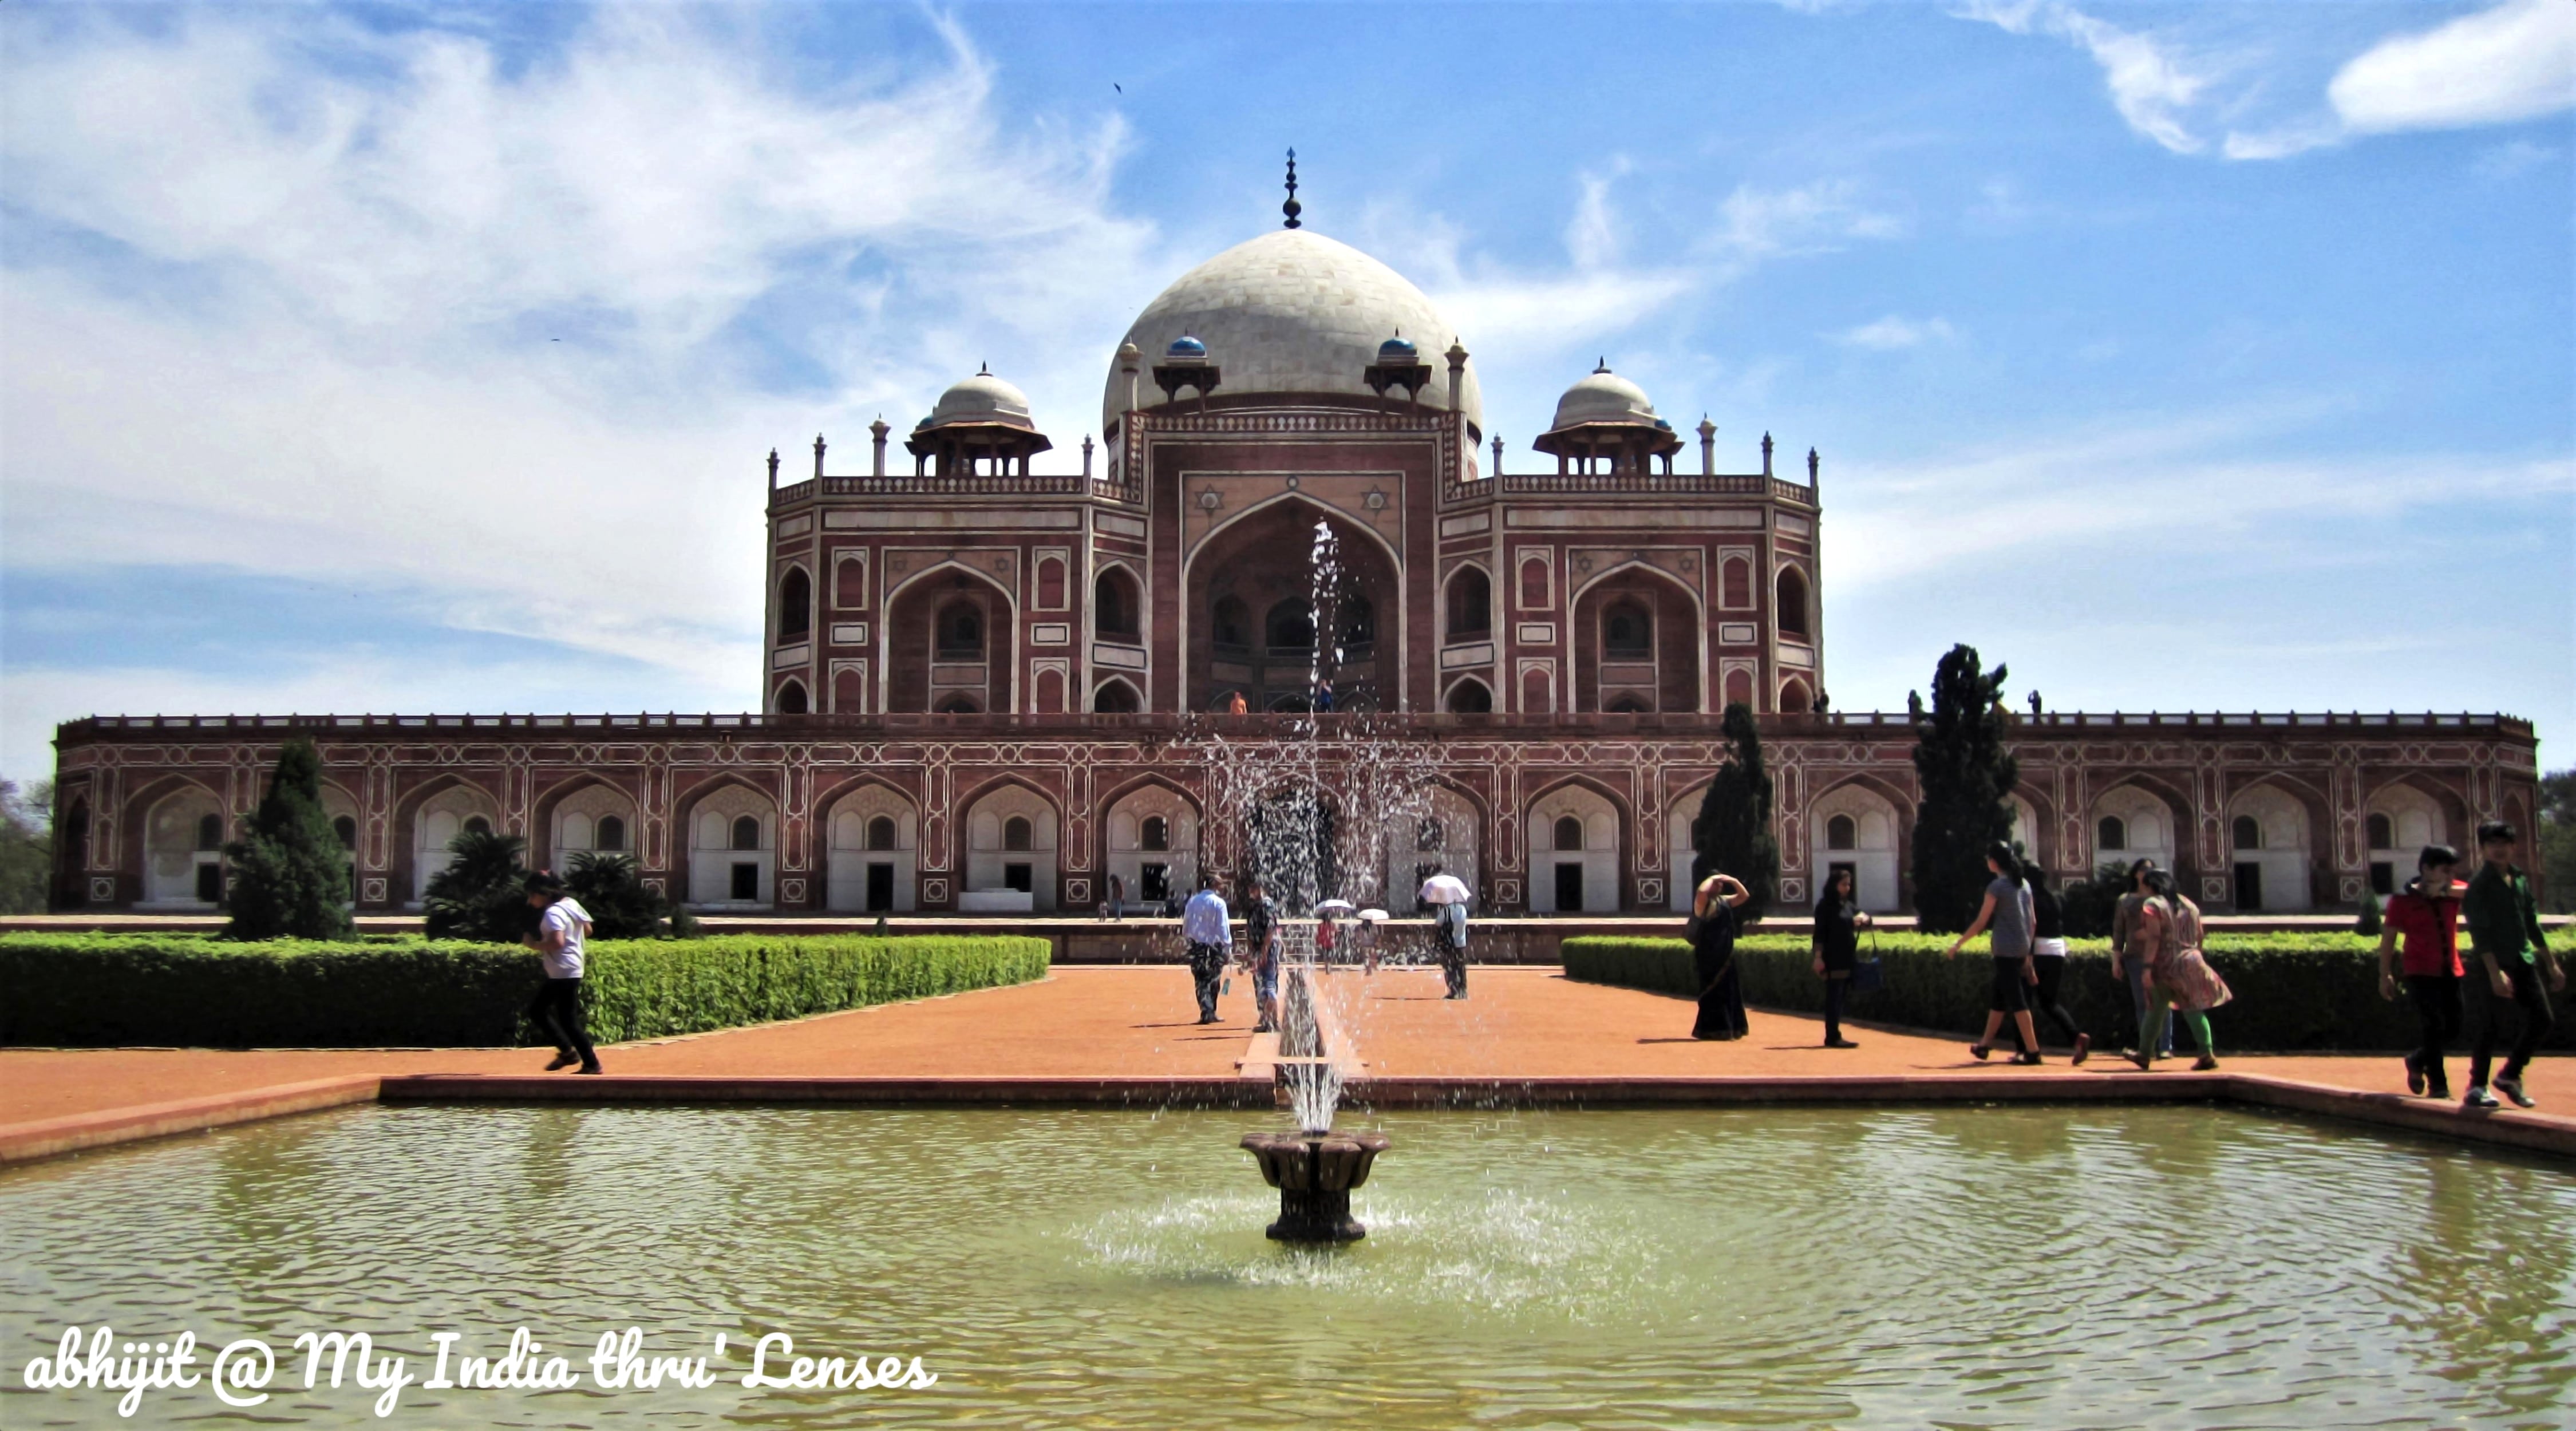 Humayun's Tomb - The Front view